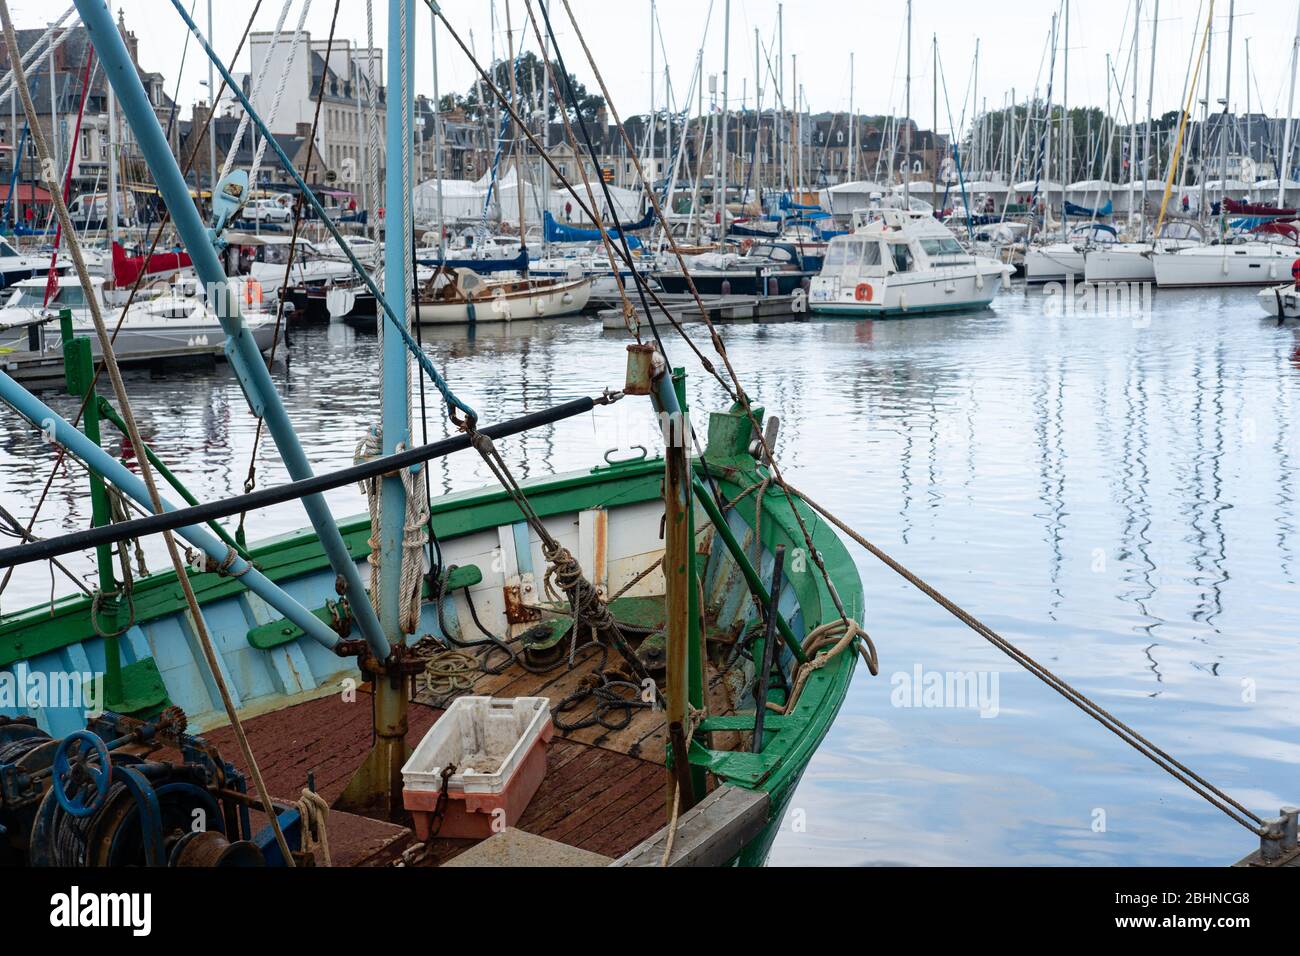 31/07/2019, Paimpol, Côte d'Armor, Brertagne, France-Port of Paimpol with fishing and leisure boats at quayside Stock Photo